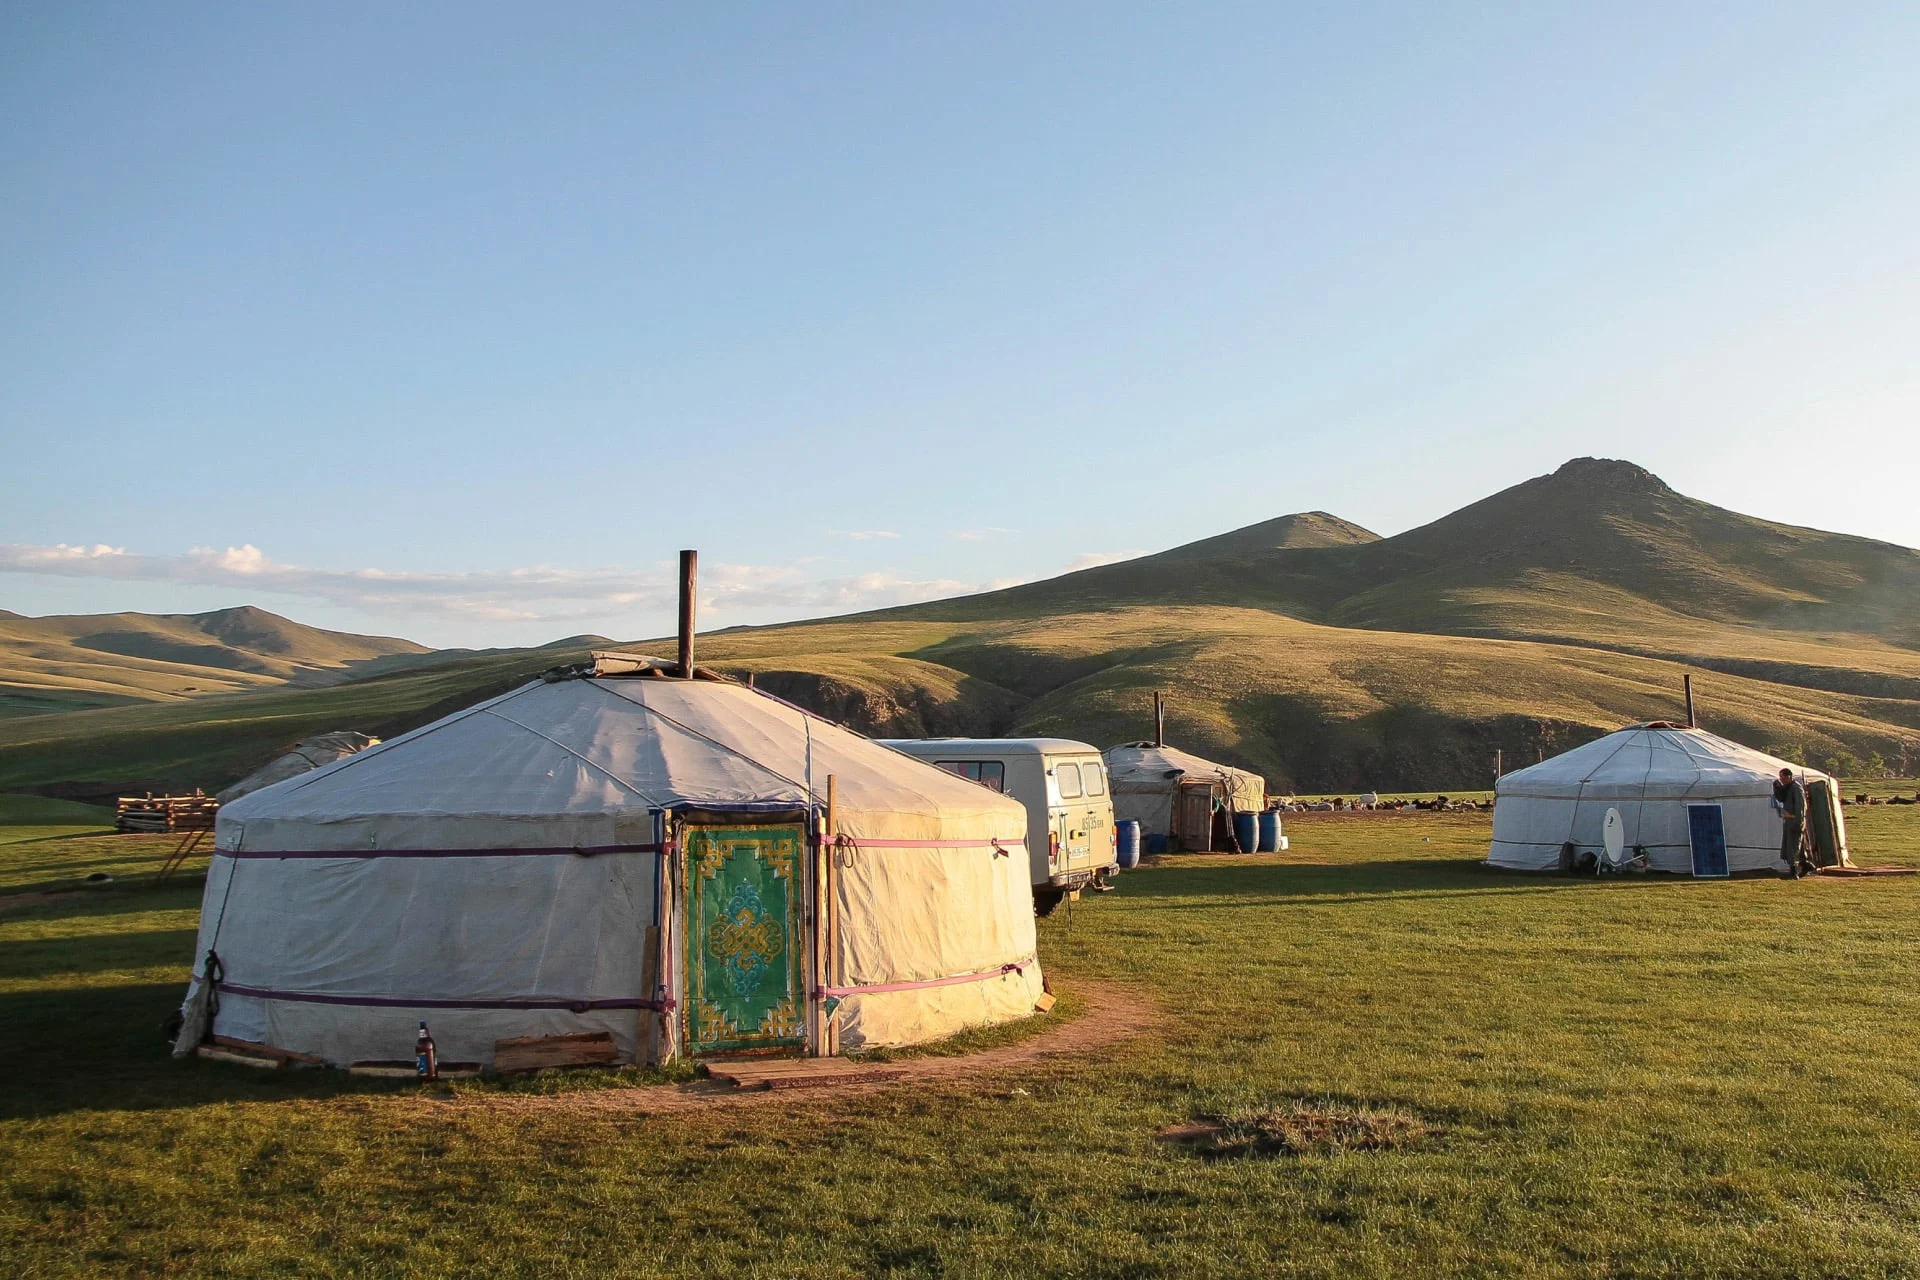 A group of yurts in the middle of a grassy field.